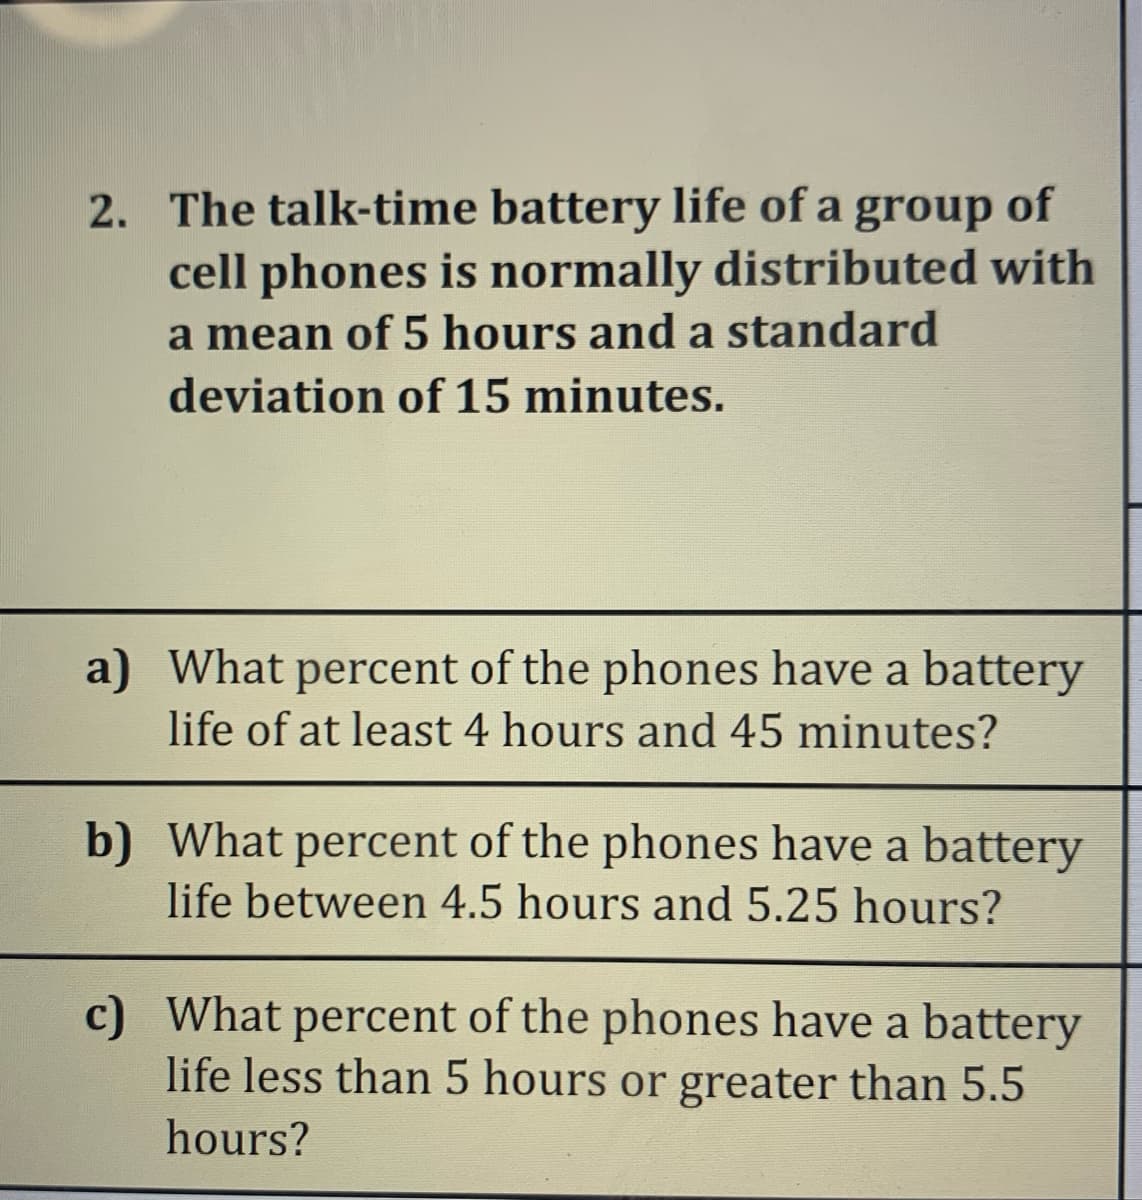 2. The talk-time battery life of a group of
cell phones is normally distributed with
a mean of 5 hours and a standard
deviation of 15 minutes.
a) What percent of the phones have a battery
life of at least 4 hours and 45 minutes?
b) What percent of the phones have a battery
life between 4.5 hours and 5.25 hours?
c) What percent of the phones have a battery
life less than 5 hours or greater than 5.5
hours?
